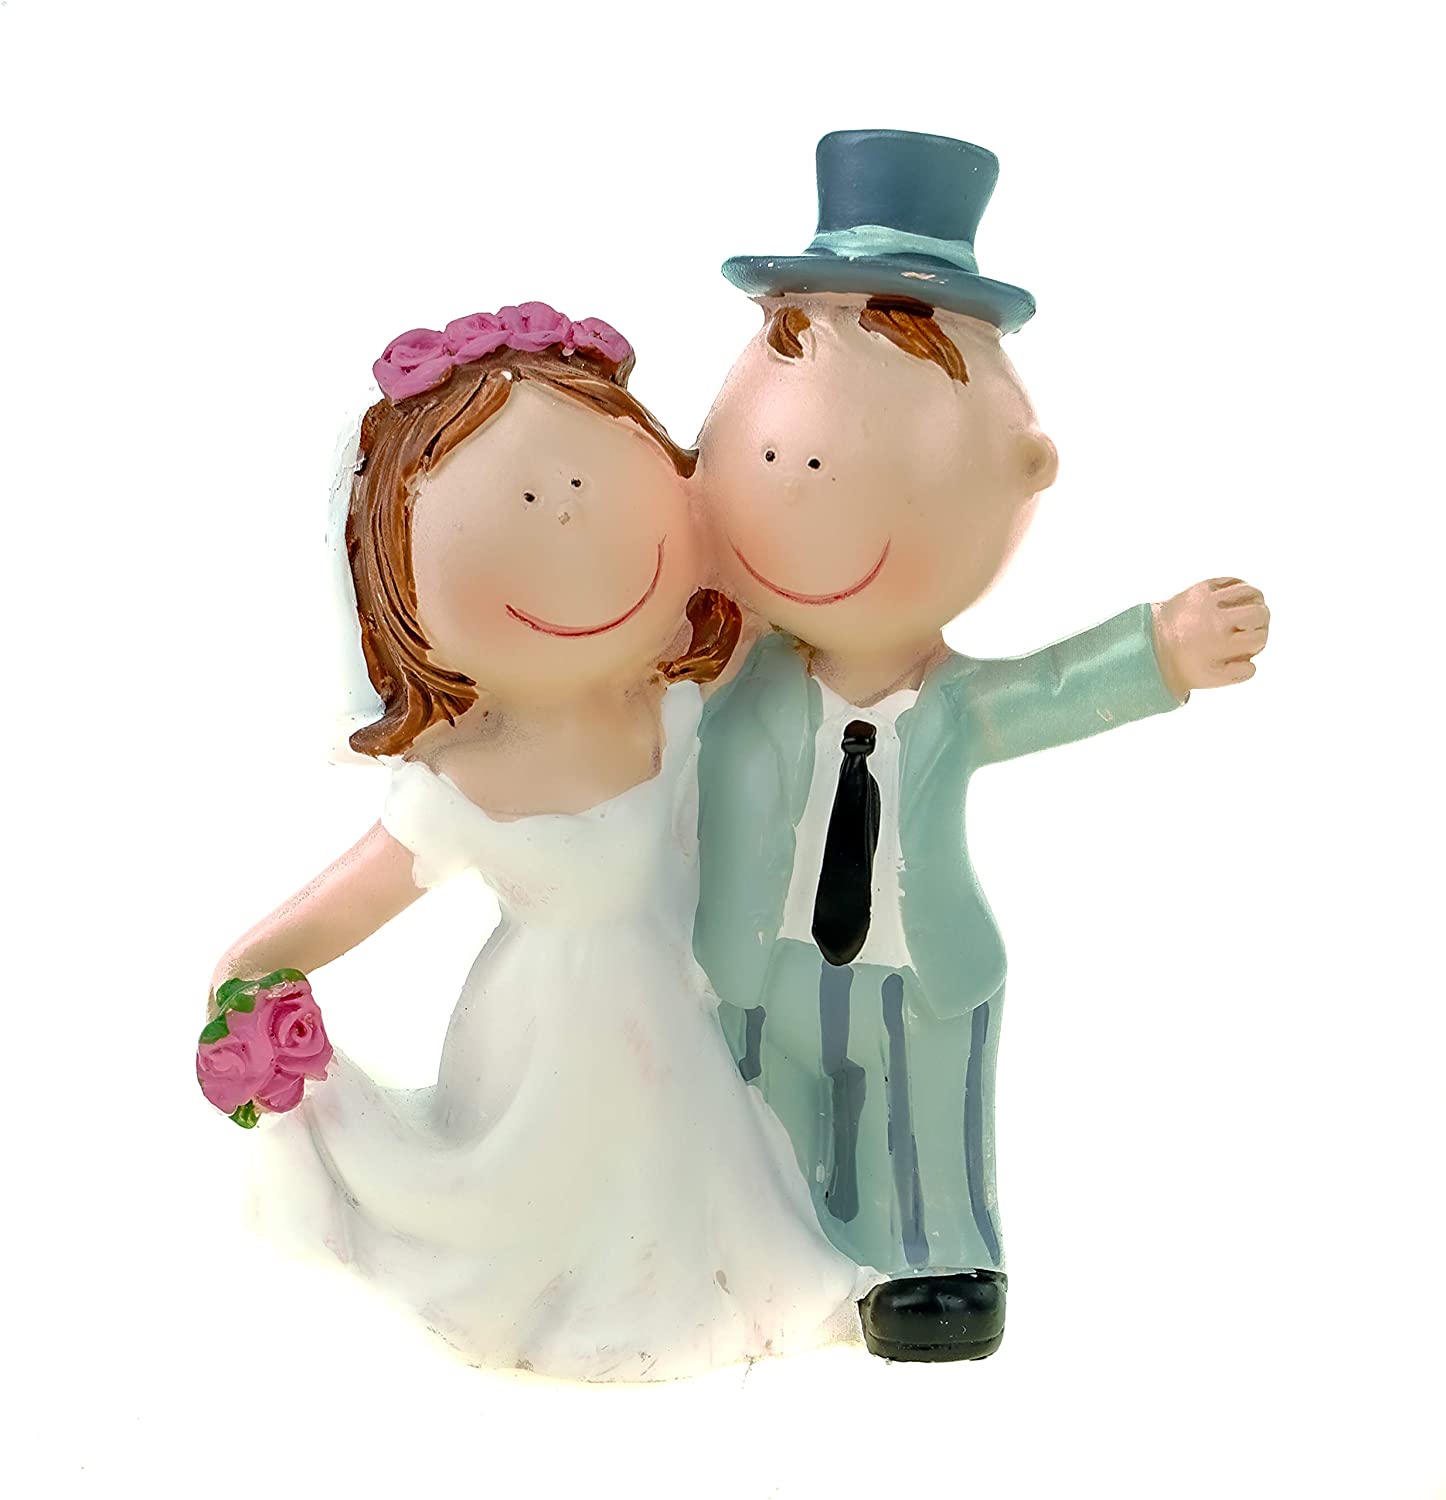 Bride & Groom Cake Topper Caricature Figurine - To Have & to Hold